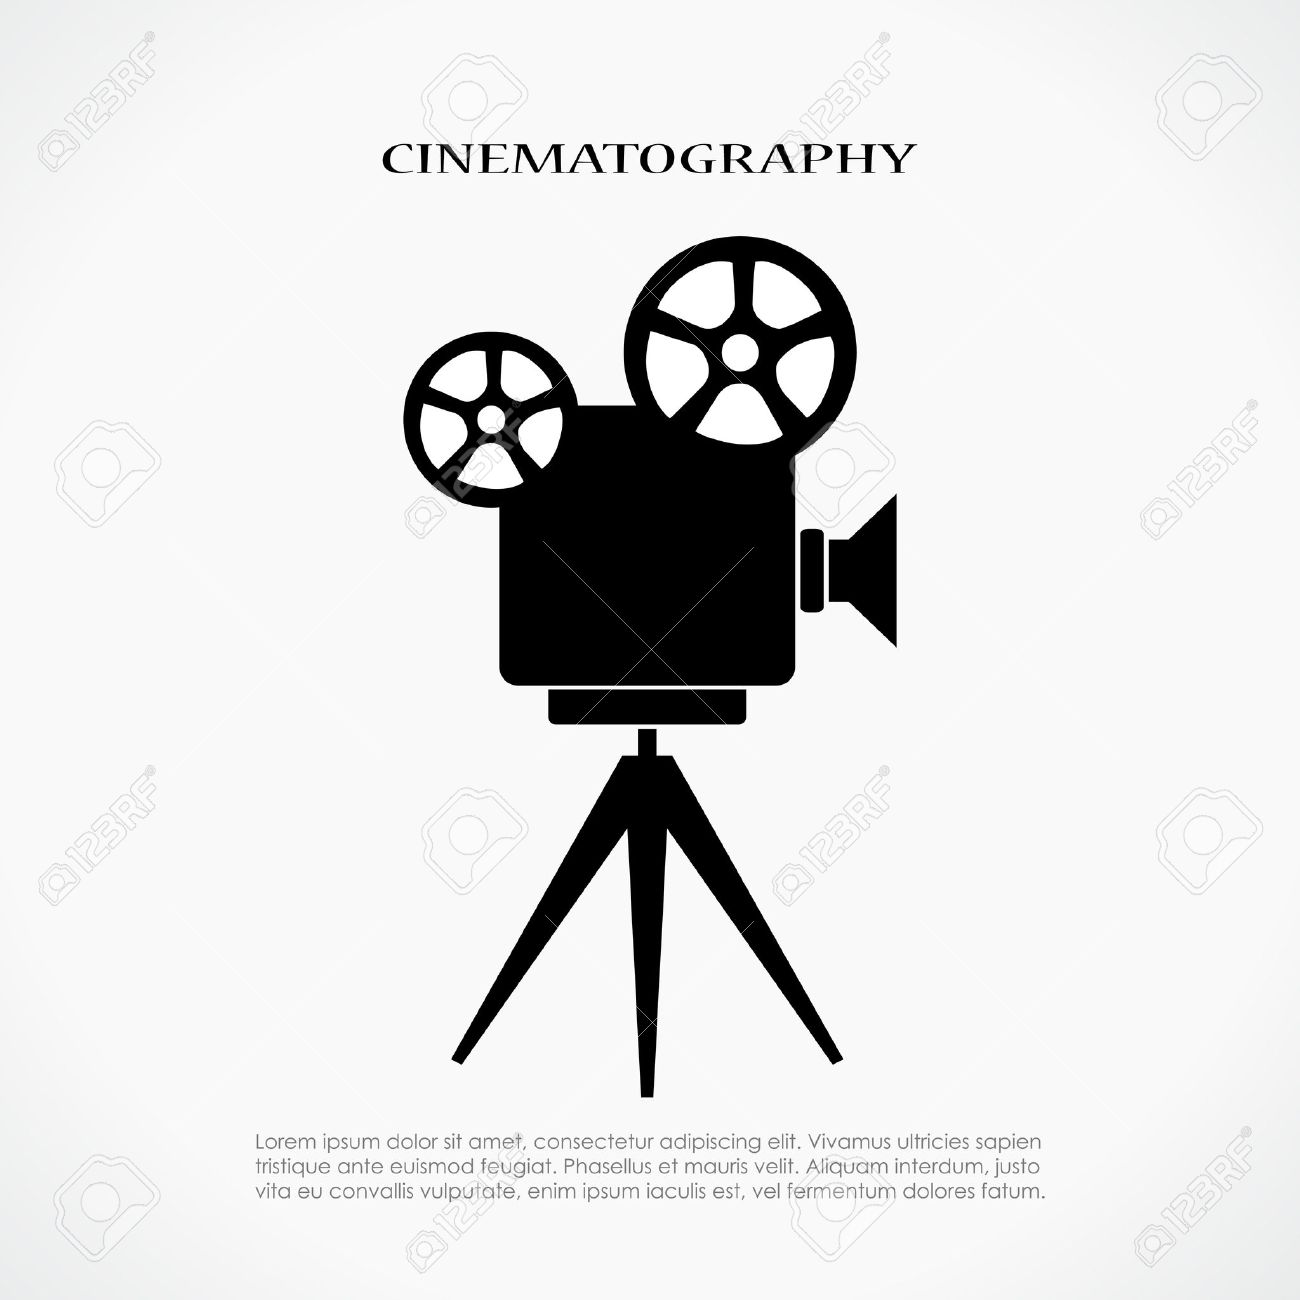 Cinematography Icons Vector - Download Free Vector Art, Stock 